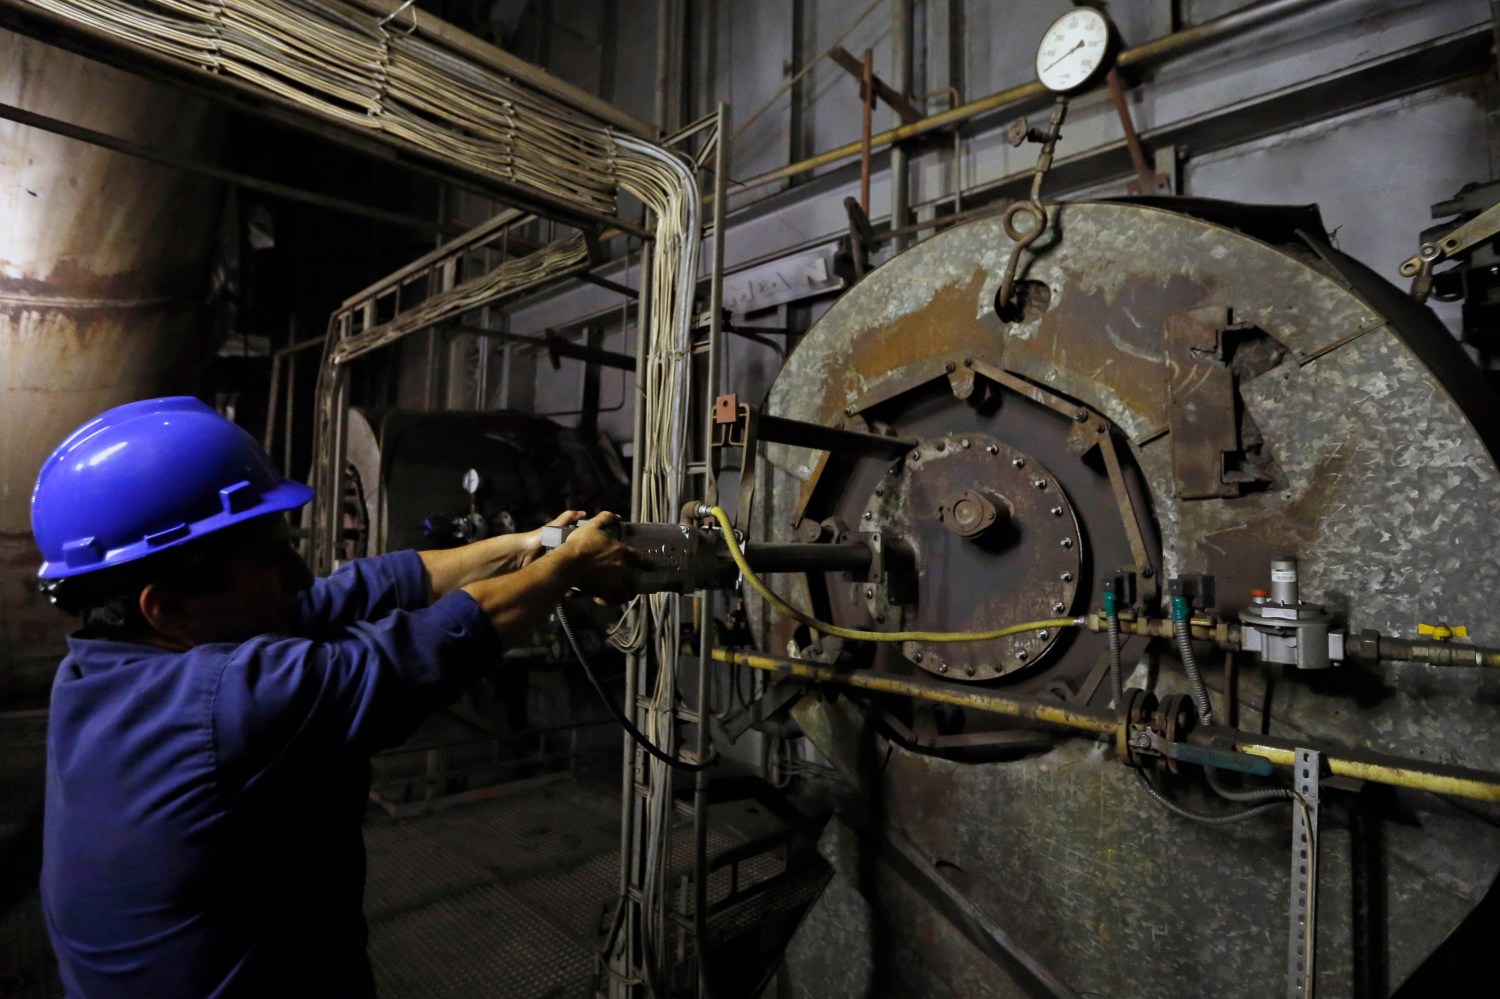 A worker checks installations at Isalnita coal power plant, May 30, 2014.  REUTERS/Bogdan Cristel (ROMANIA - Tags: BUSINESS ENERGY)